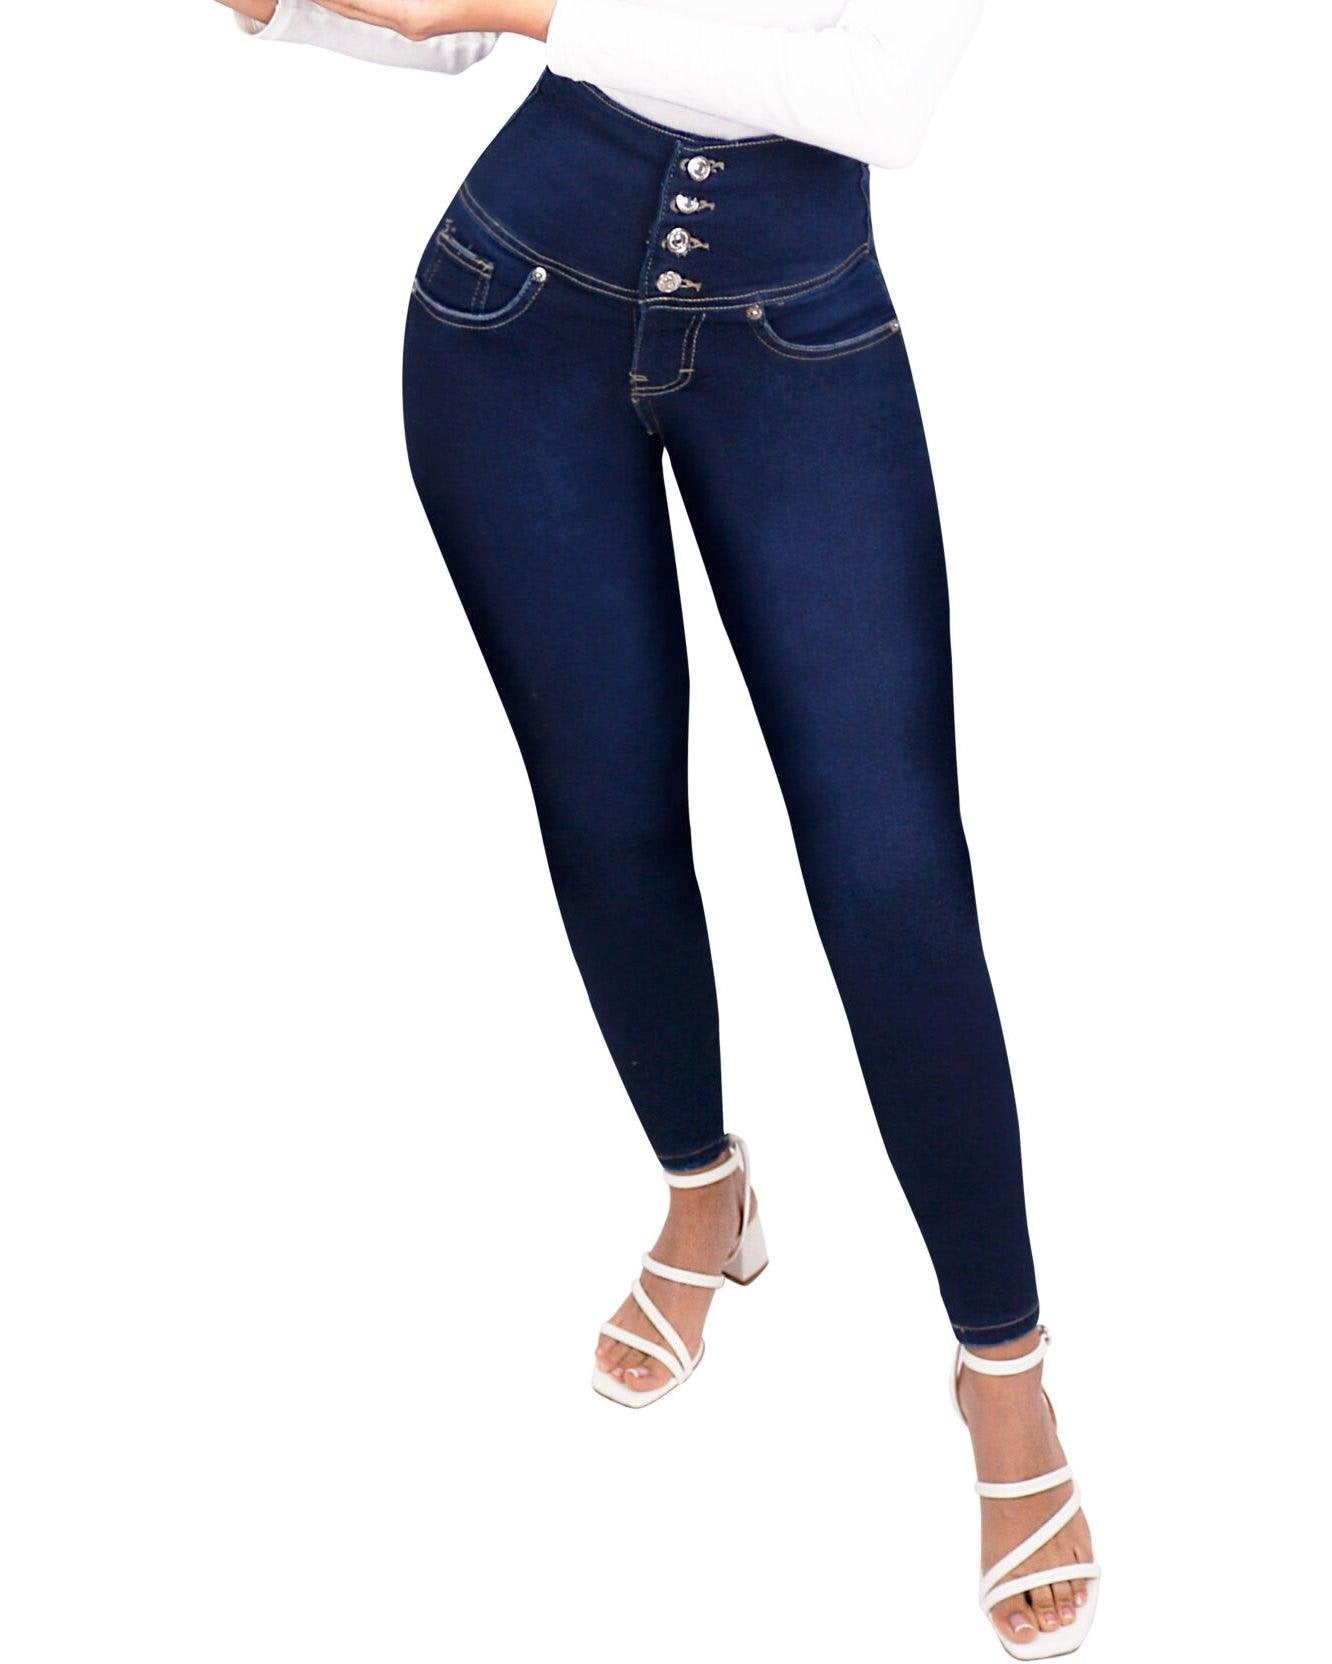 🎄Christmas Sales 49% off🎄Curvy Jeans (Buy 2 Free Shipping)